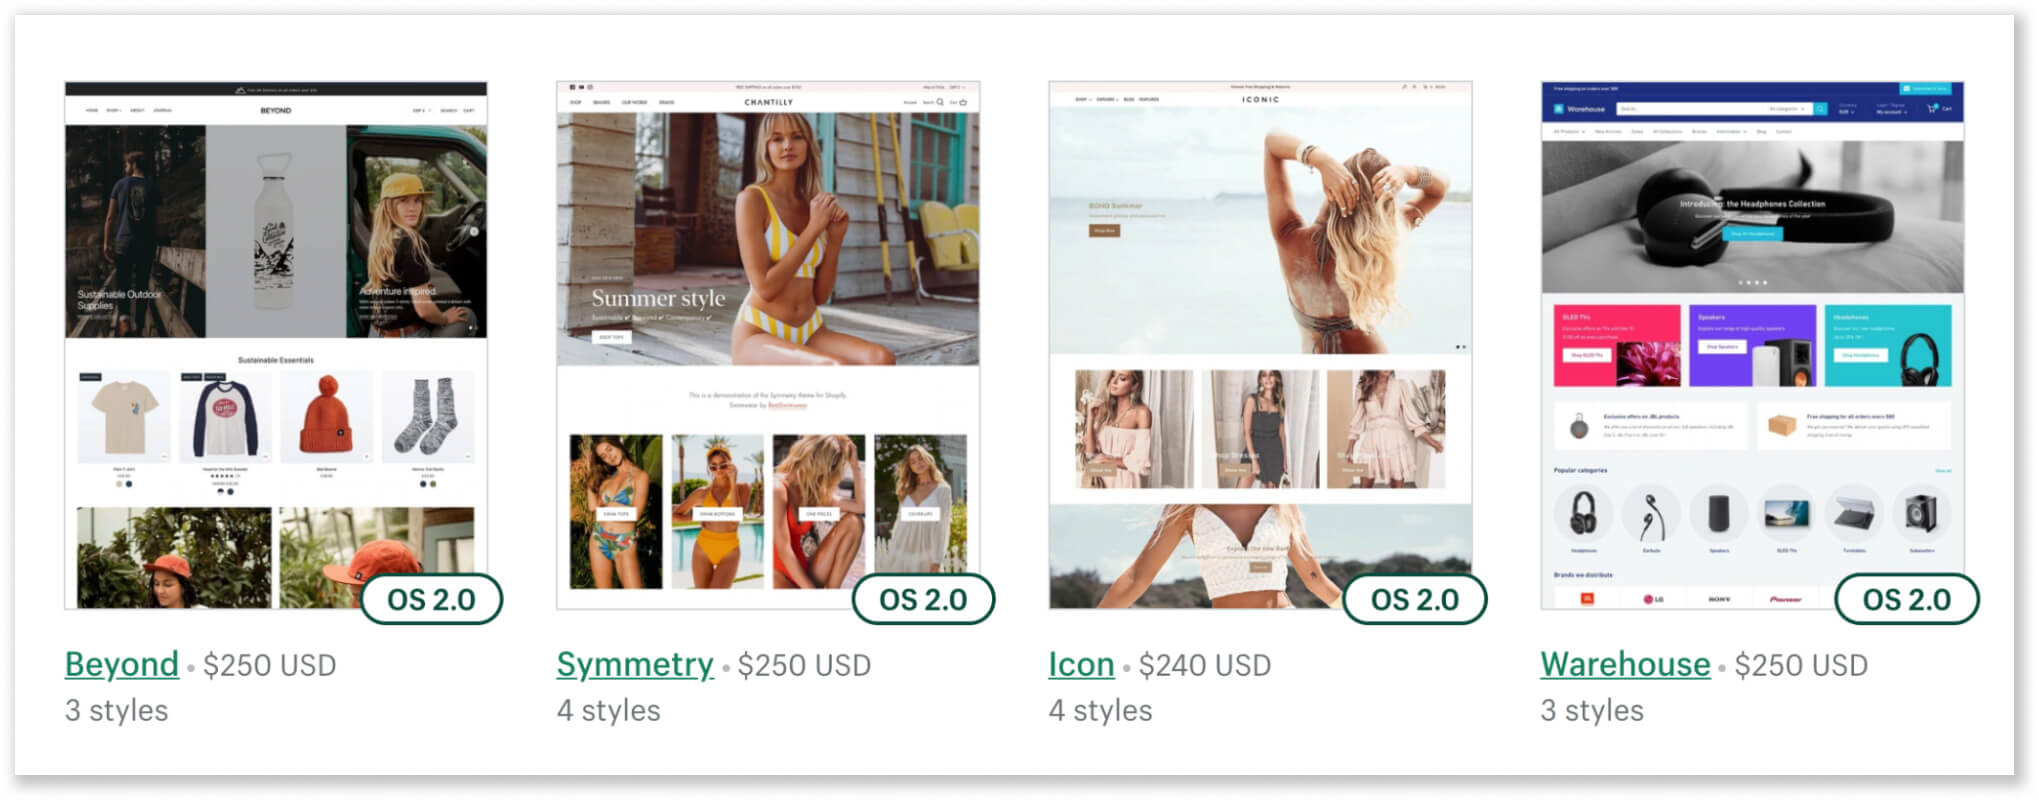 Shopify built-in e-commerce tools